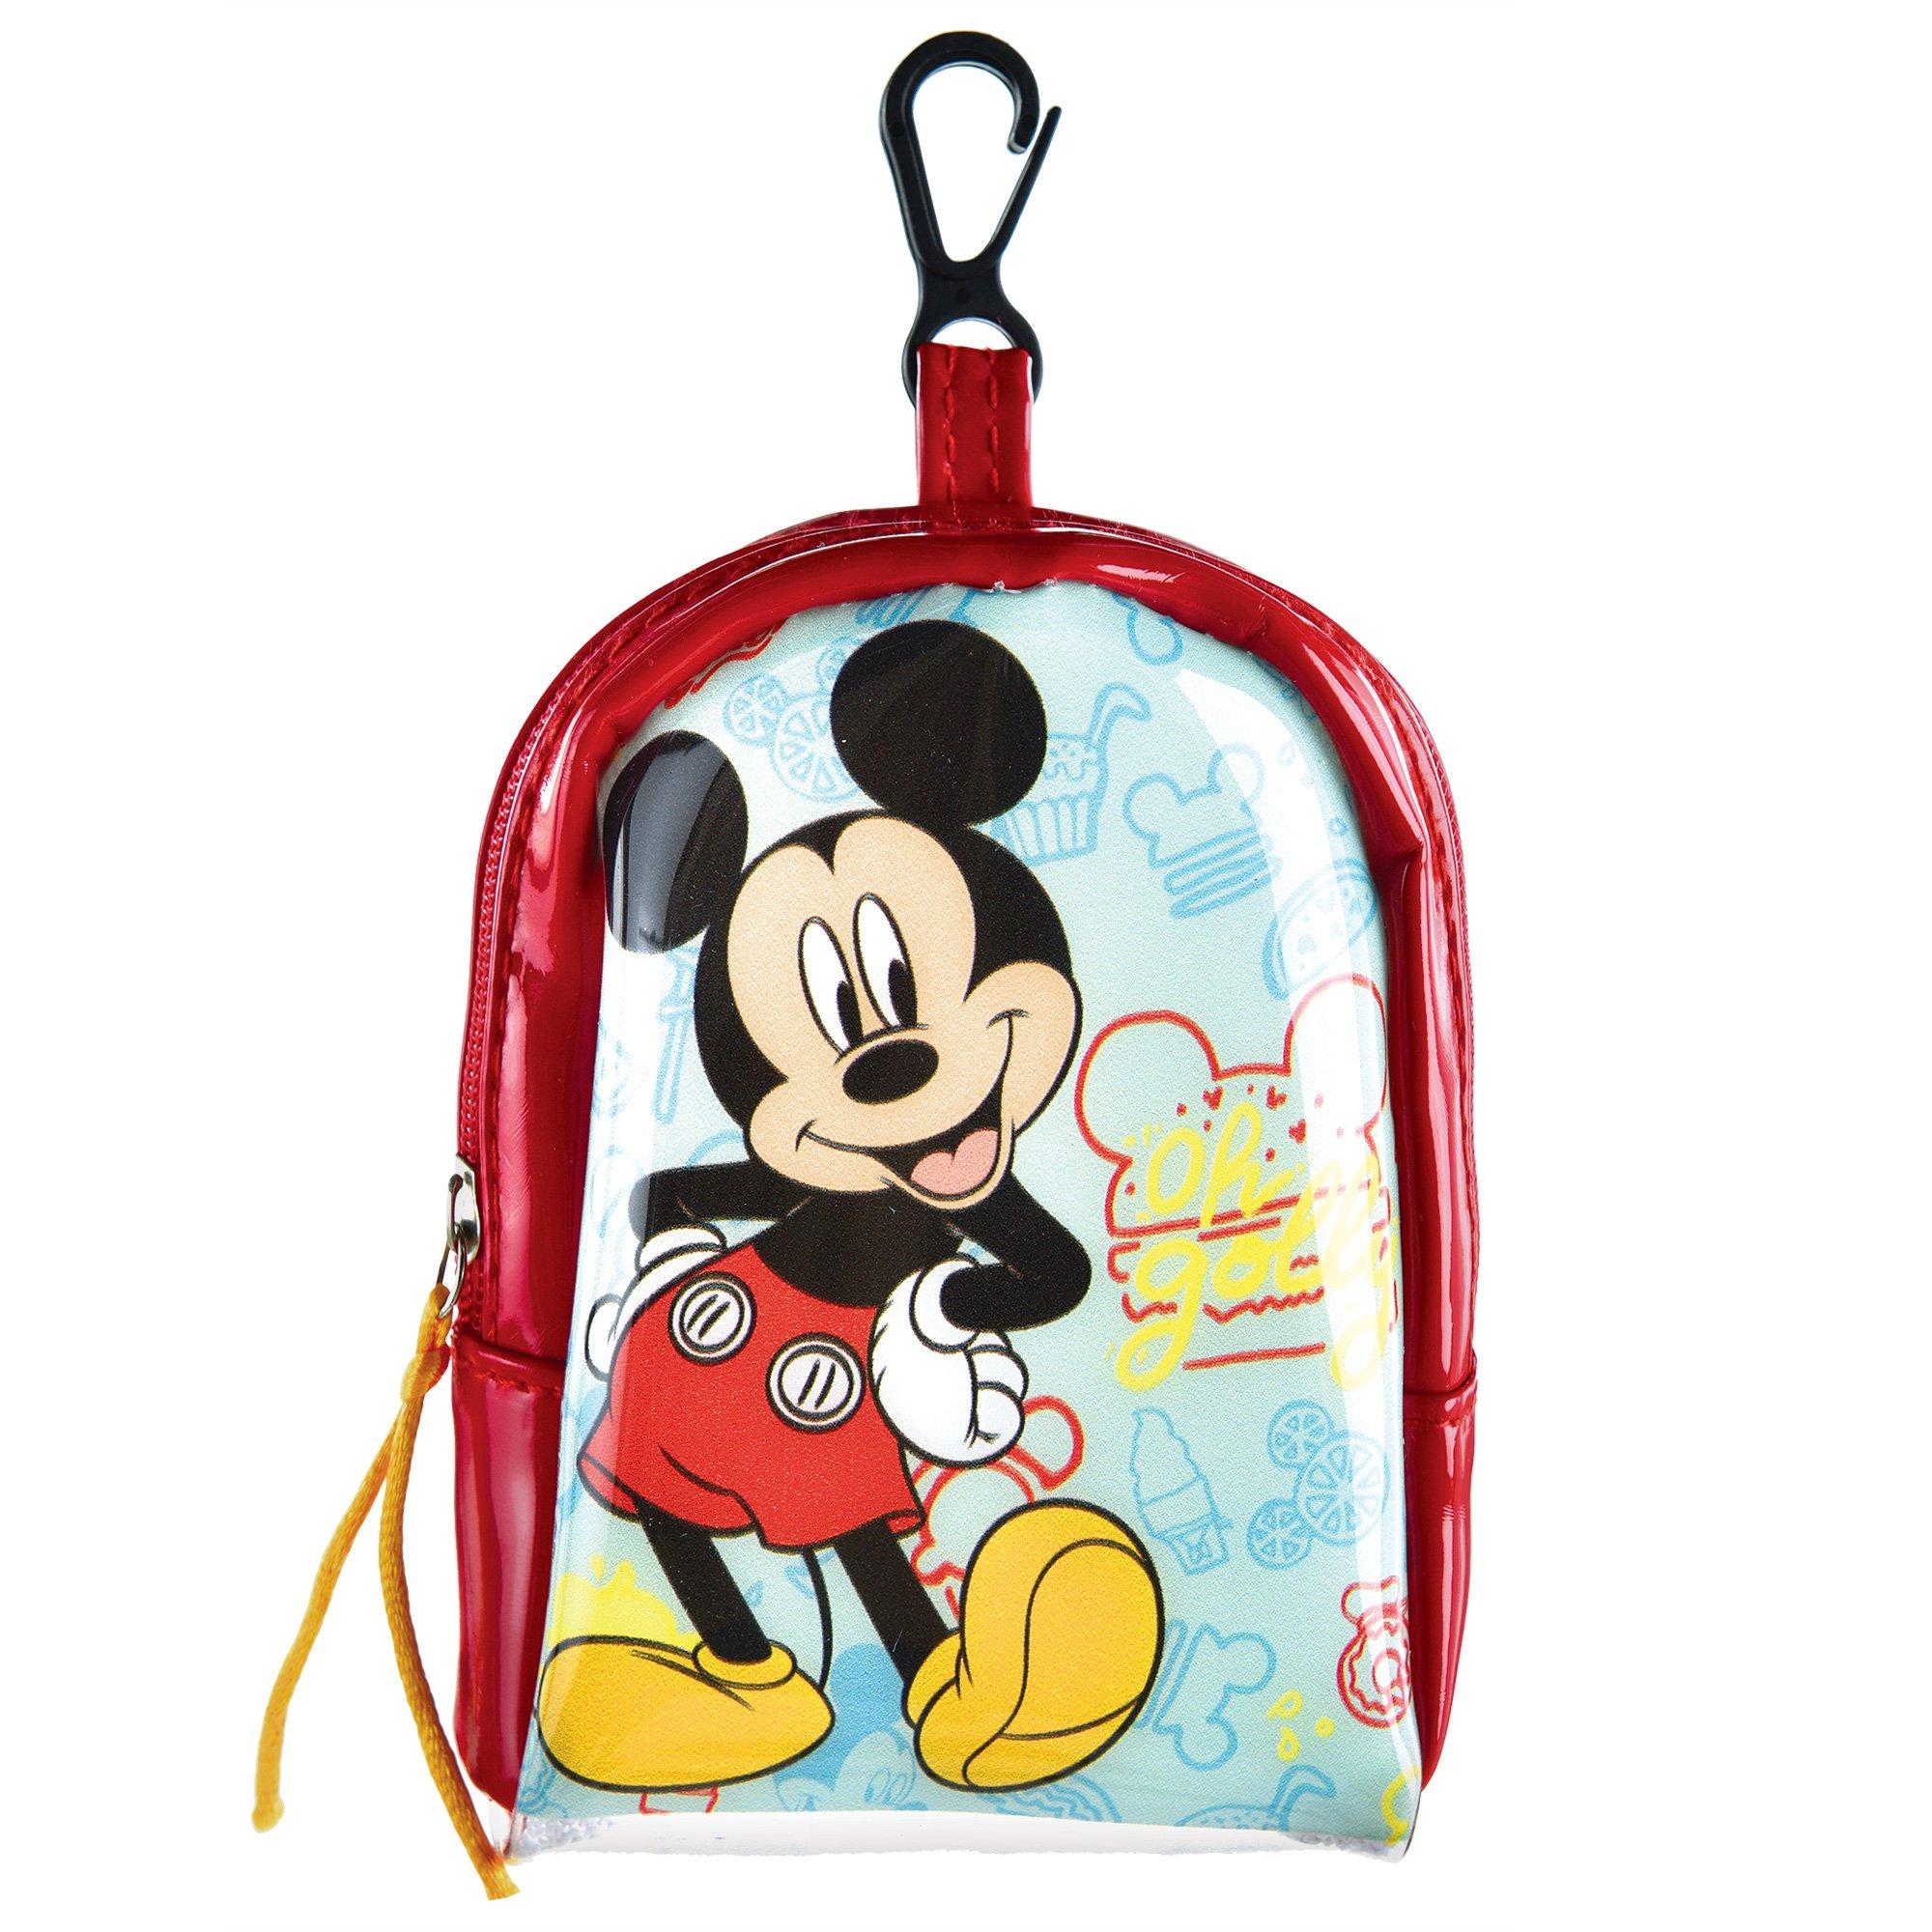 Disney Mickey Mouse Big Face Little Boy 10 Backpack